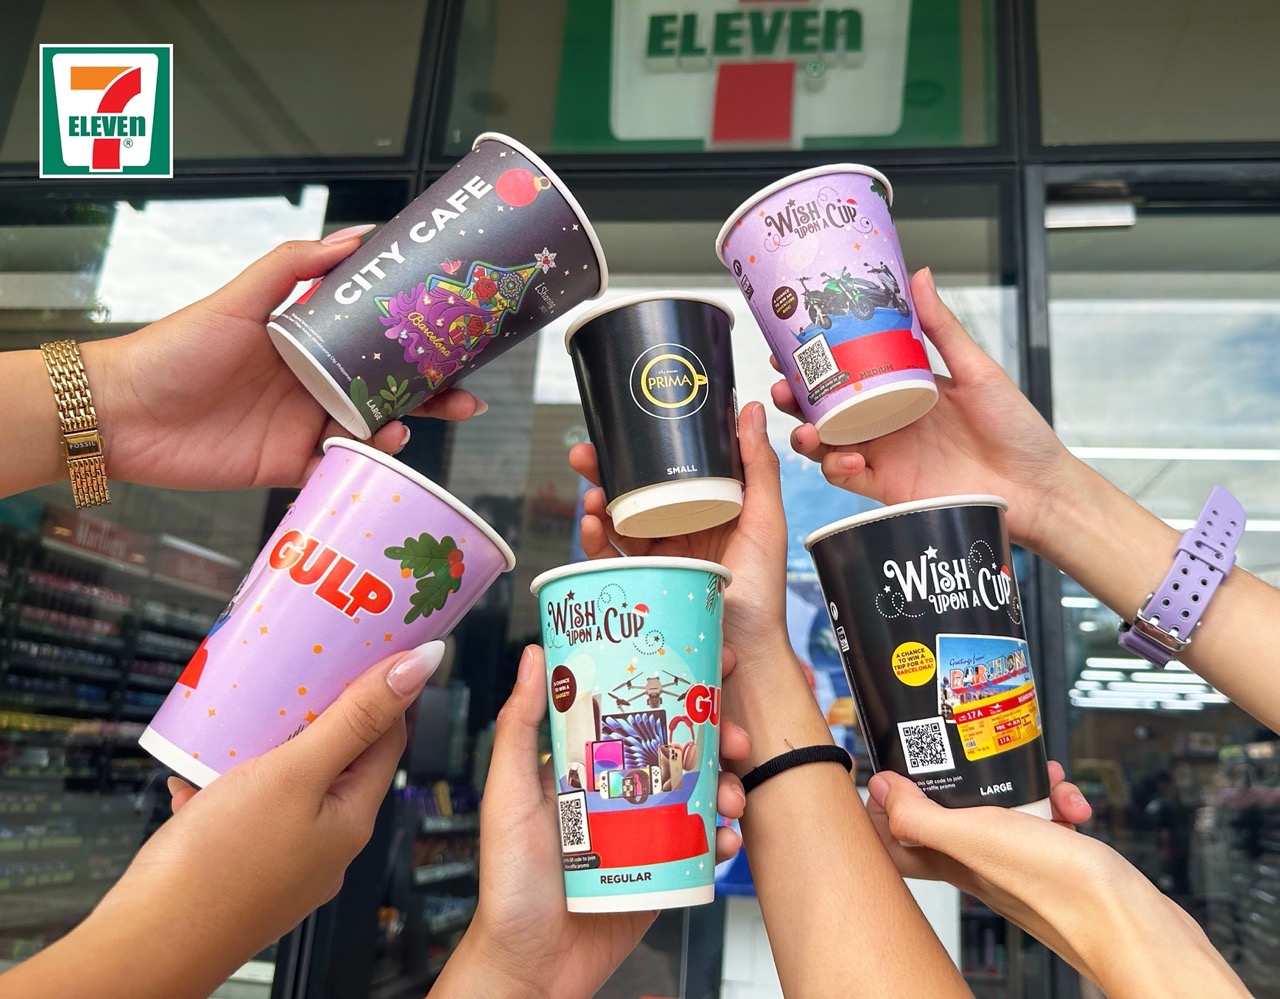 7-Eleven’s “Wish Upon A Cup” holiday promotion turns Christmas dreams into reality with gadgets, adventure and a trip to Barcelona